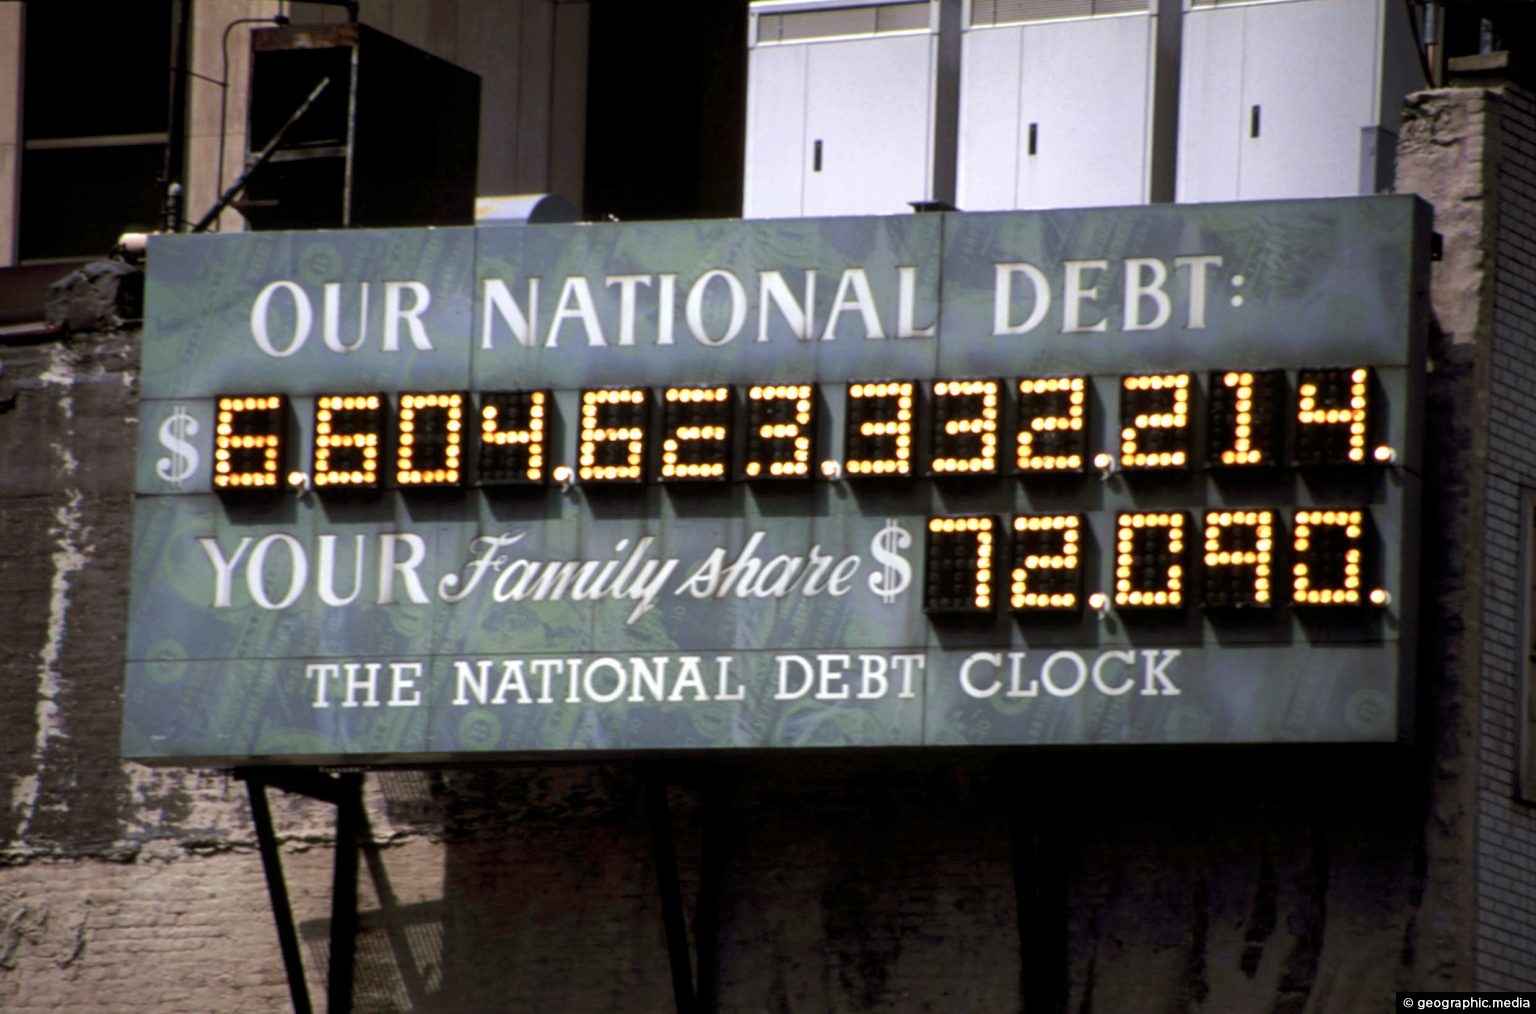 The National Debt Clock in New York Geographic Media